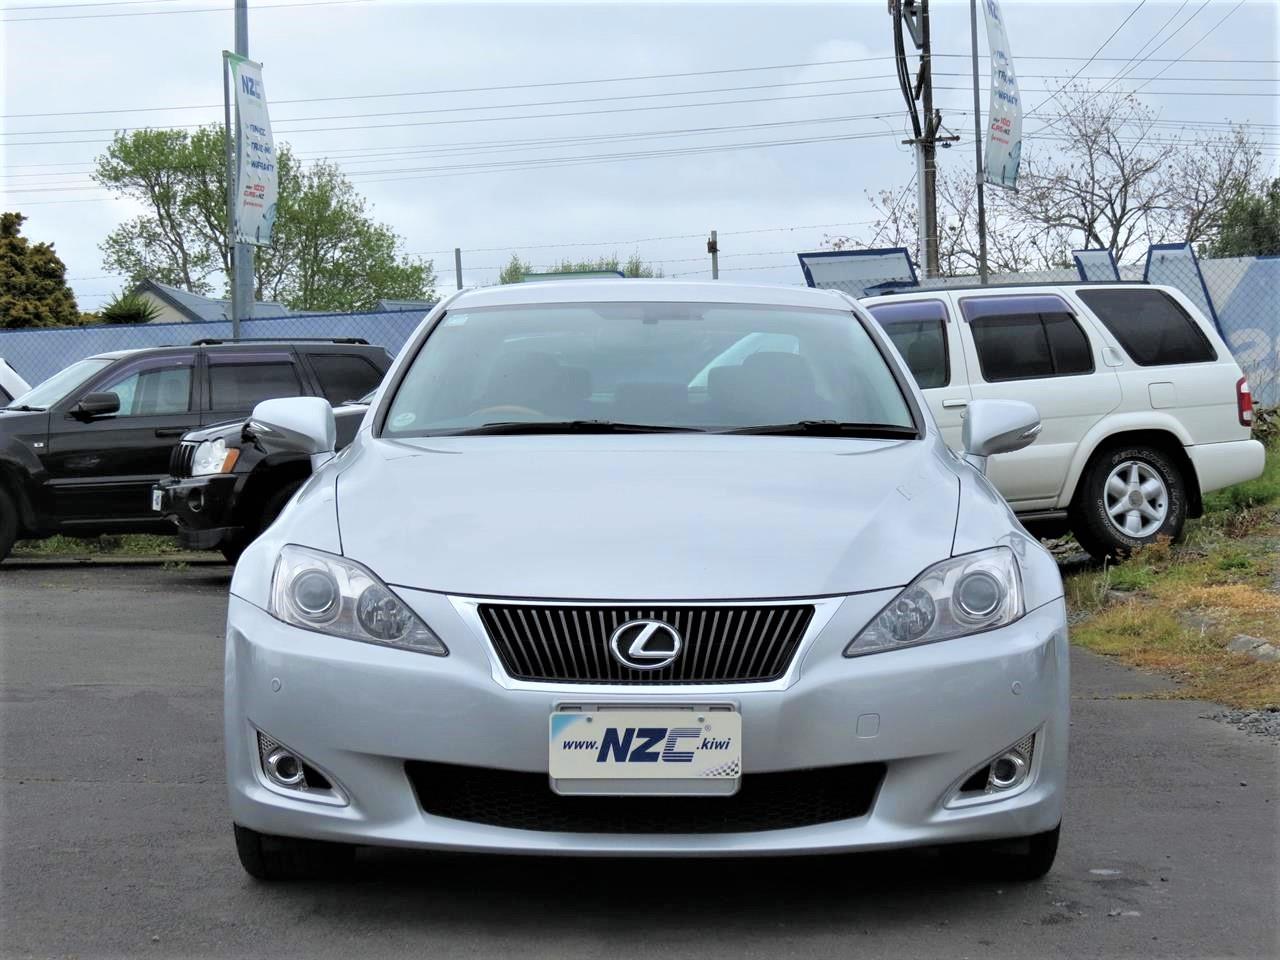 2009 Lexus IS 250 only $51 weekly